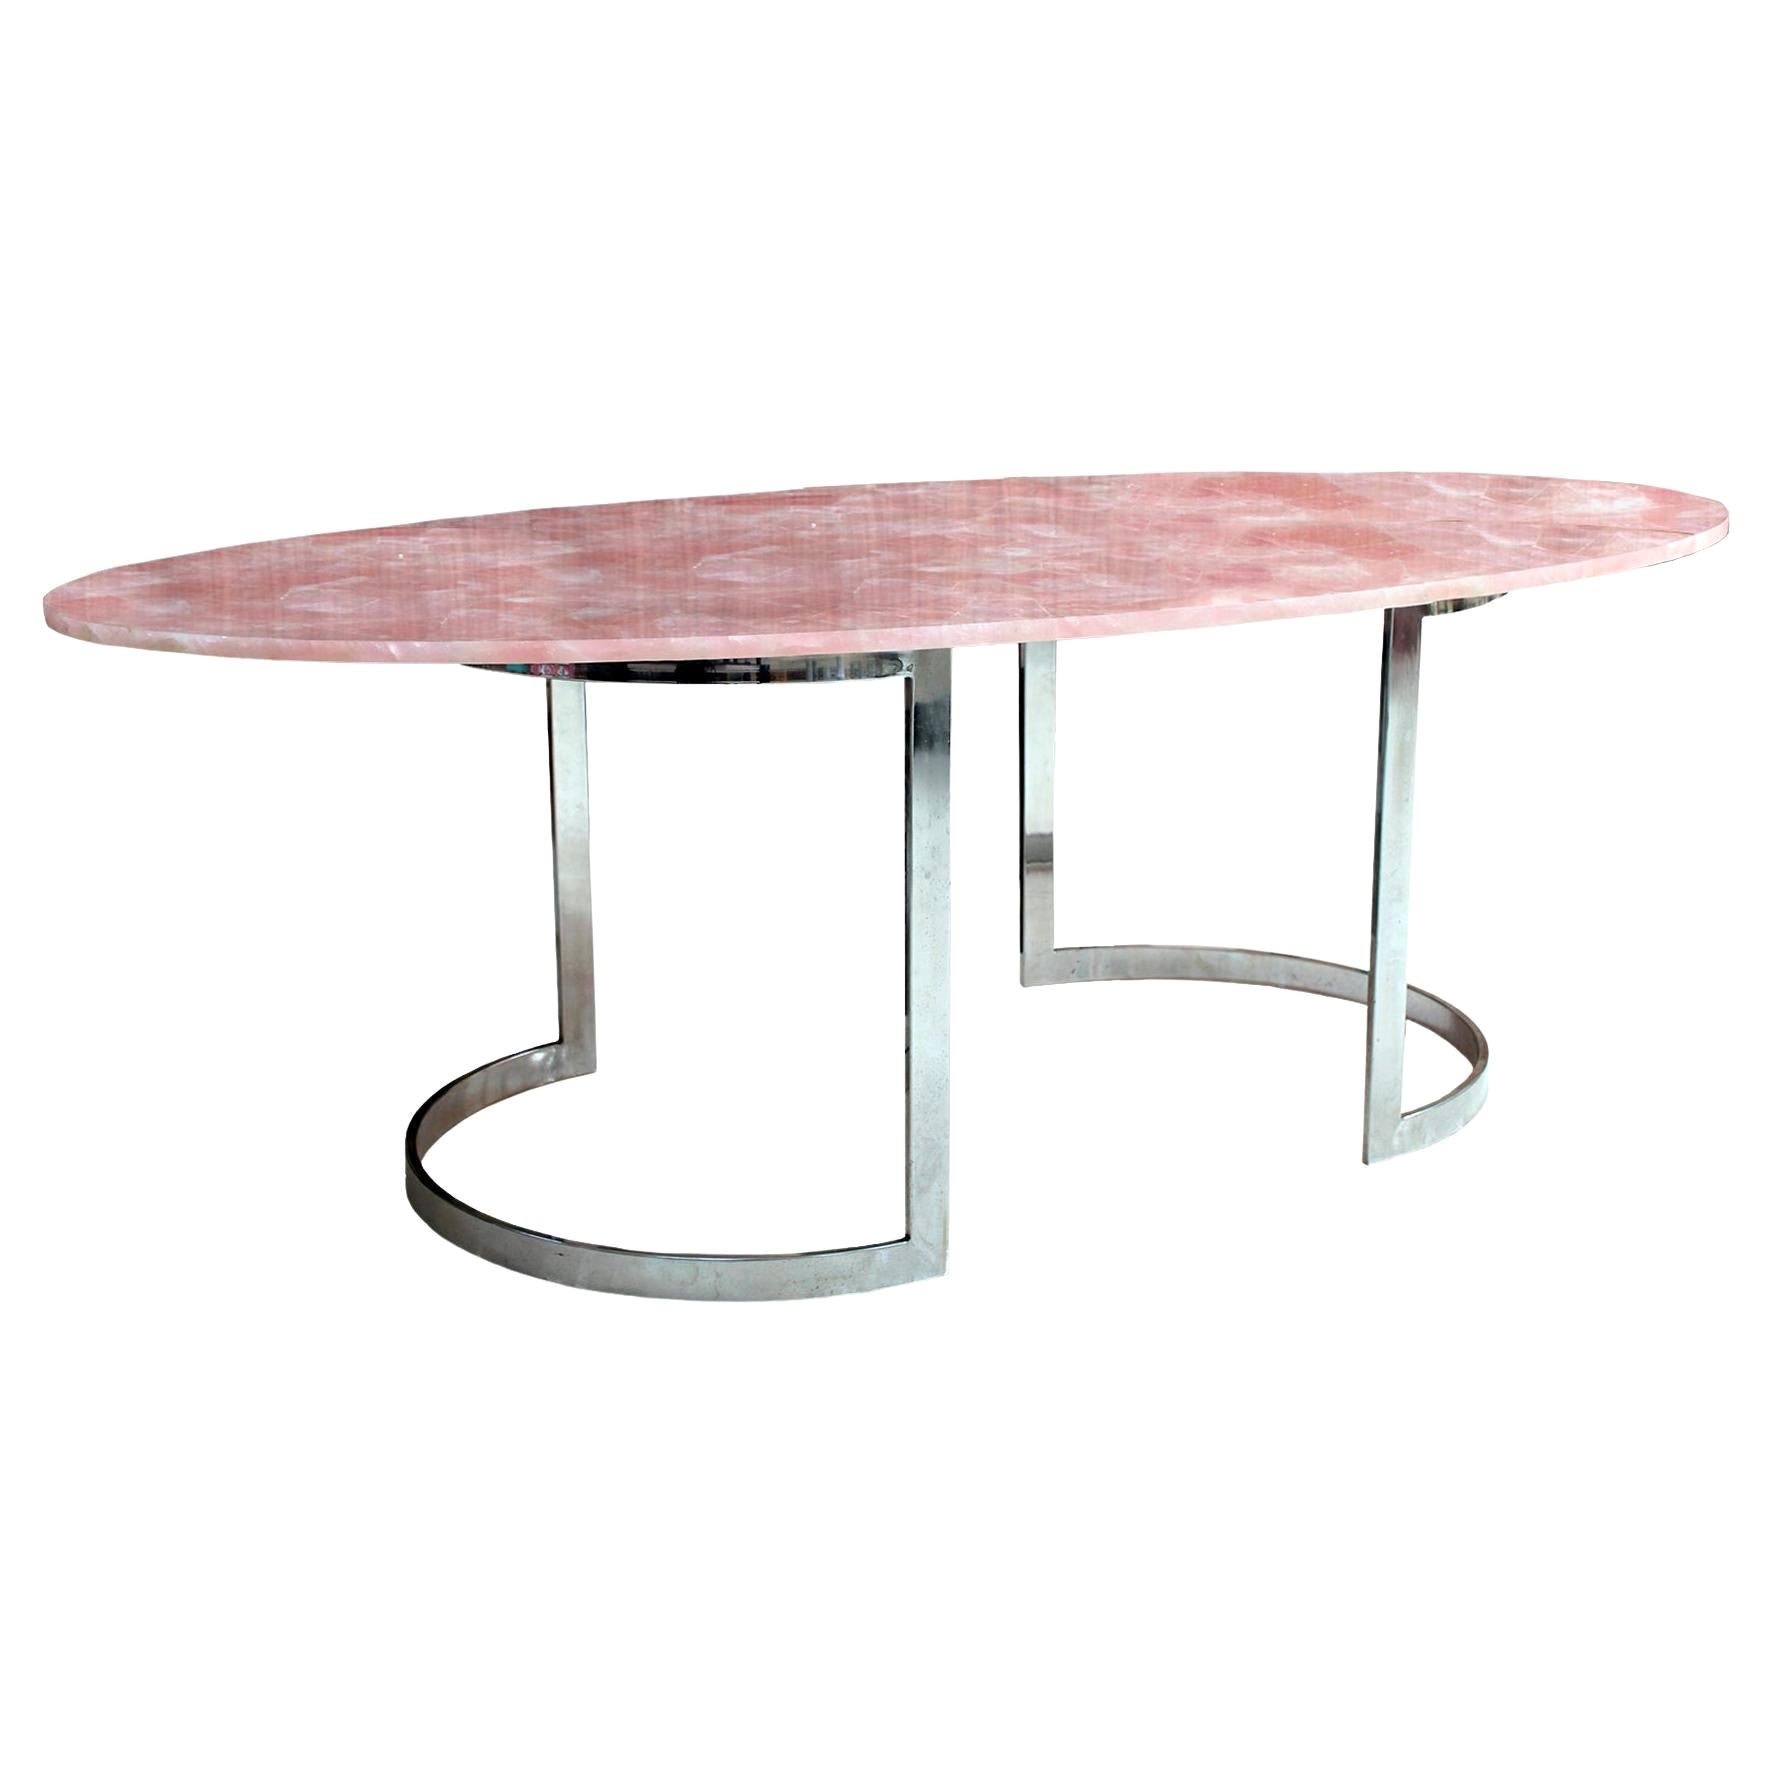 Contemporary Dining Table Made of Rose Quartz Designed by L.A. Studio For Sale